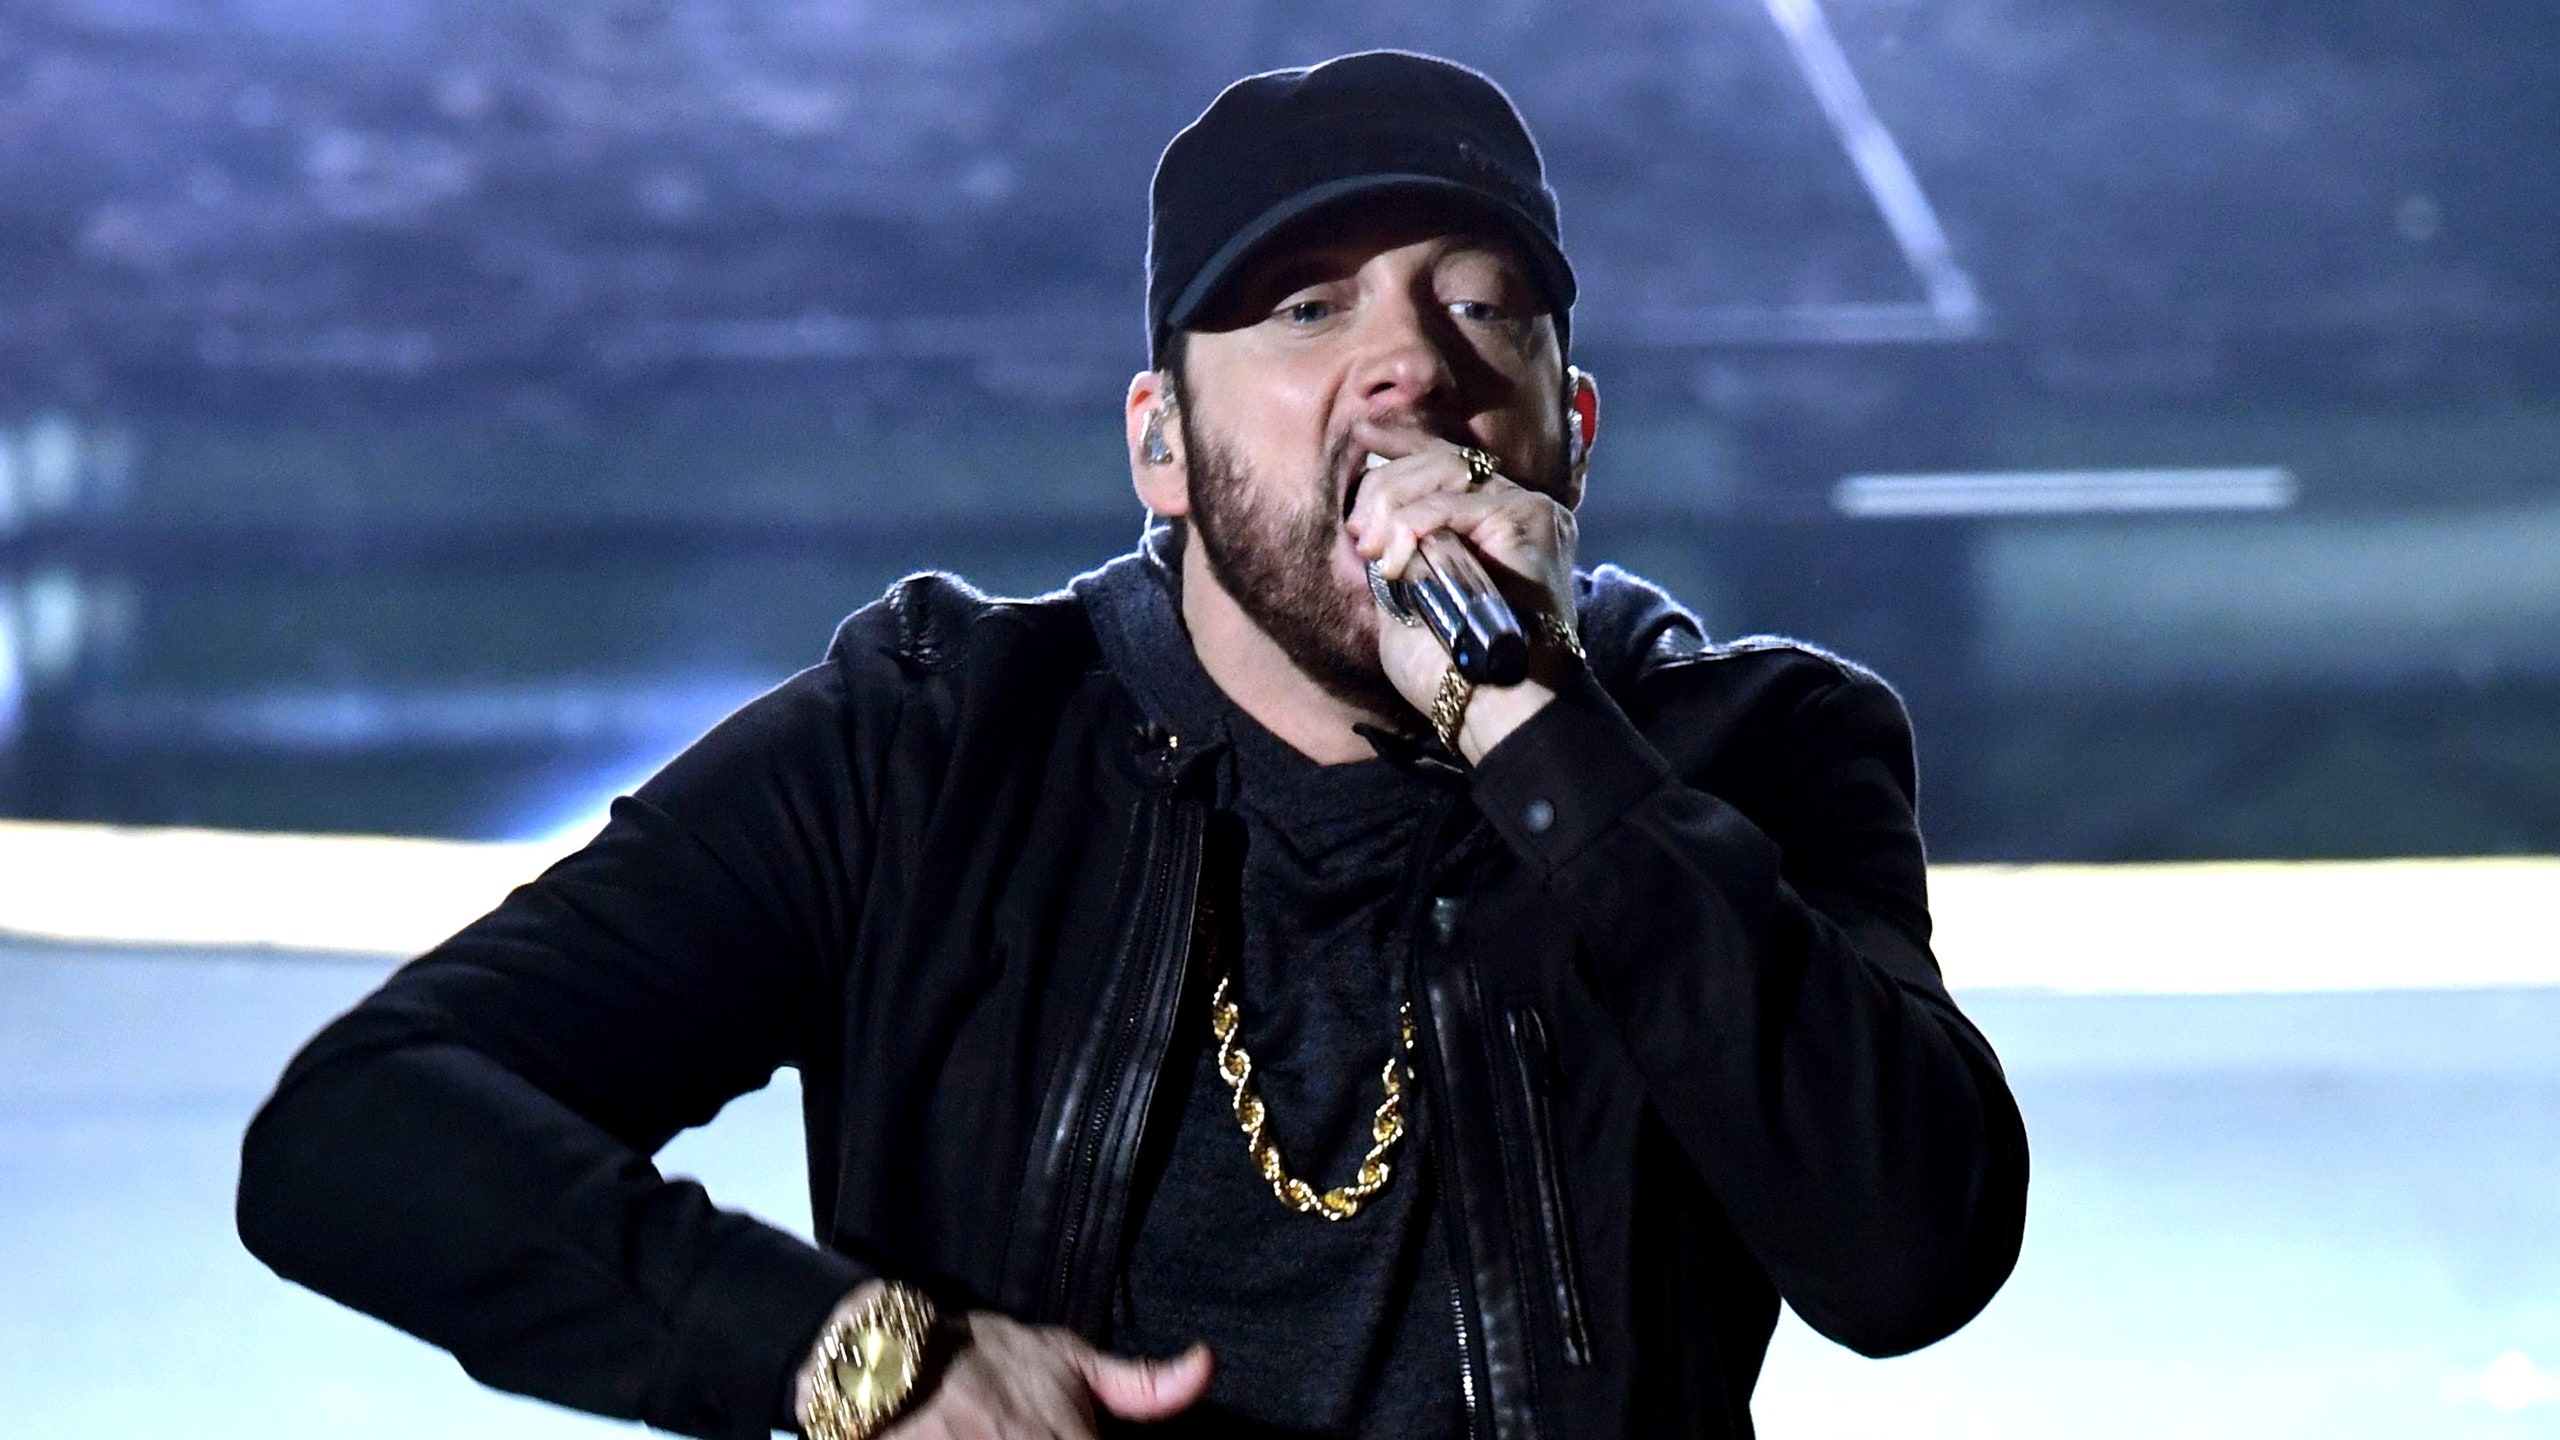 Oscars 2020: Eminem Performed 'Lose Yourself' at the Oscars and Confused Some People